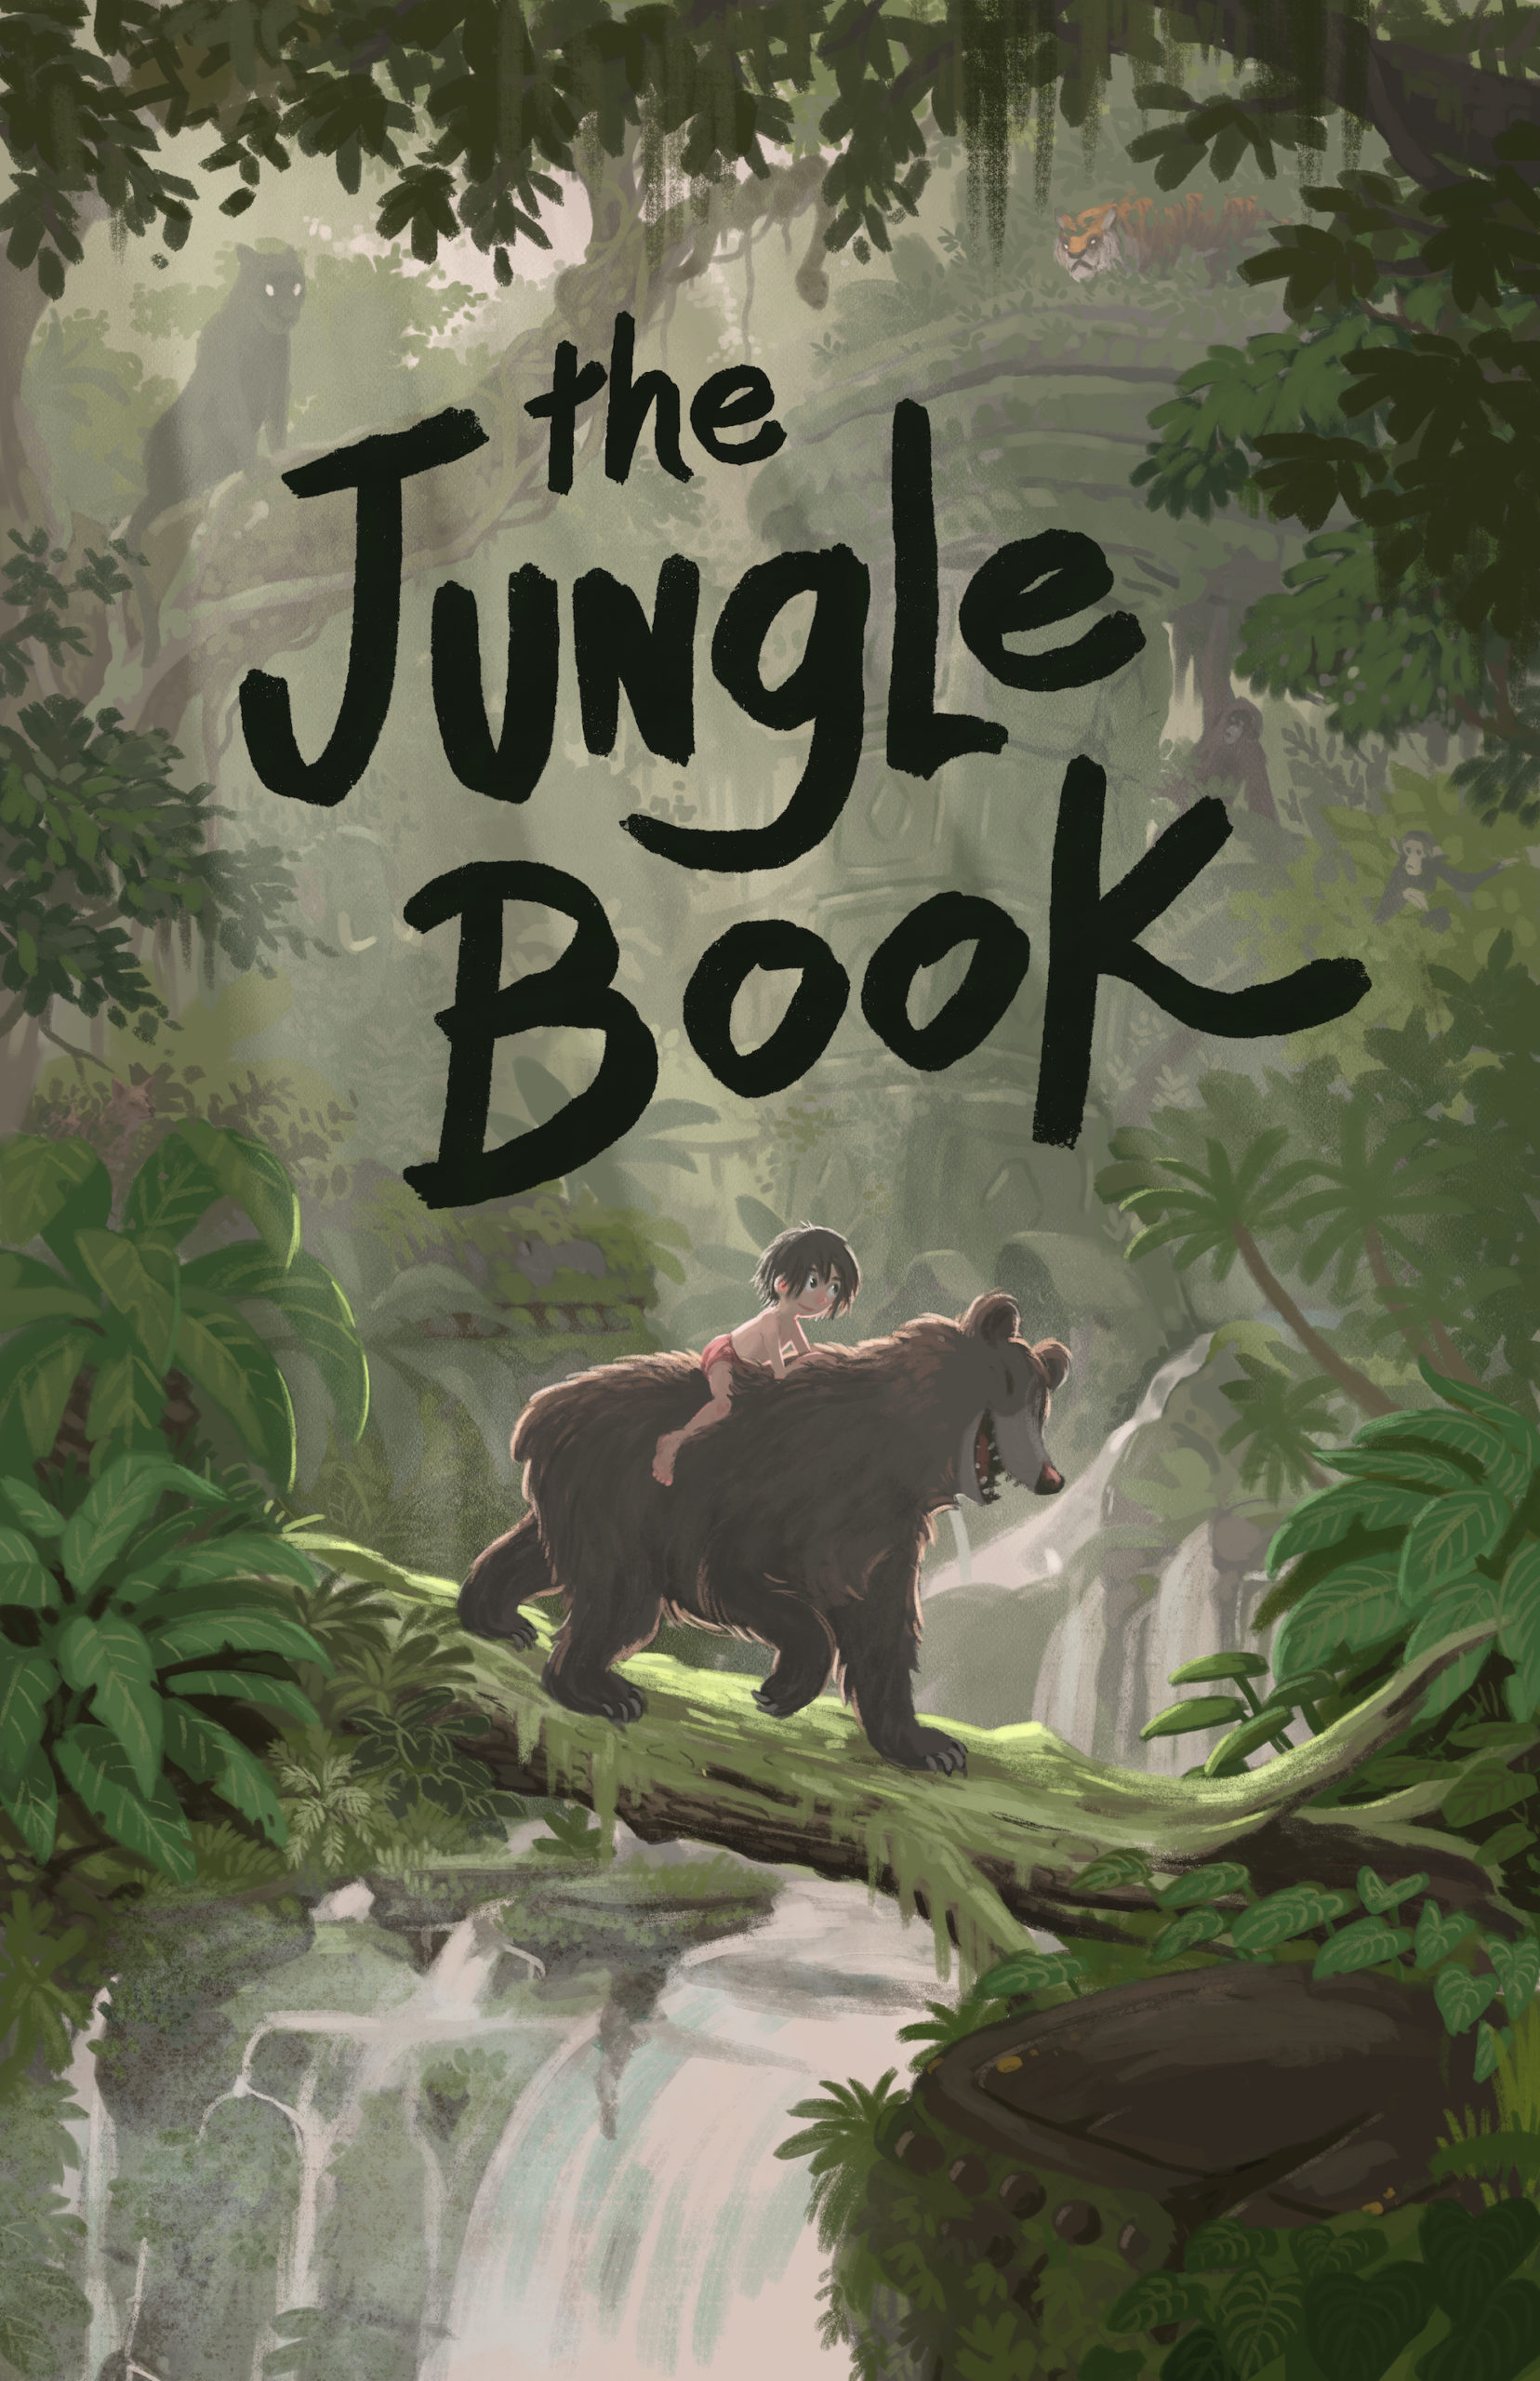 Poster for the musical the Jungle Book